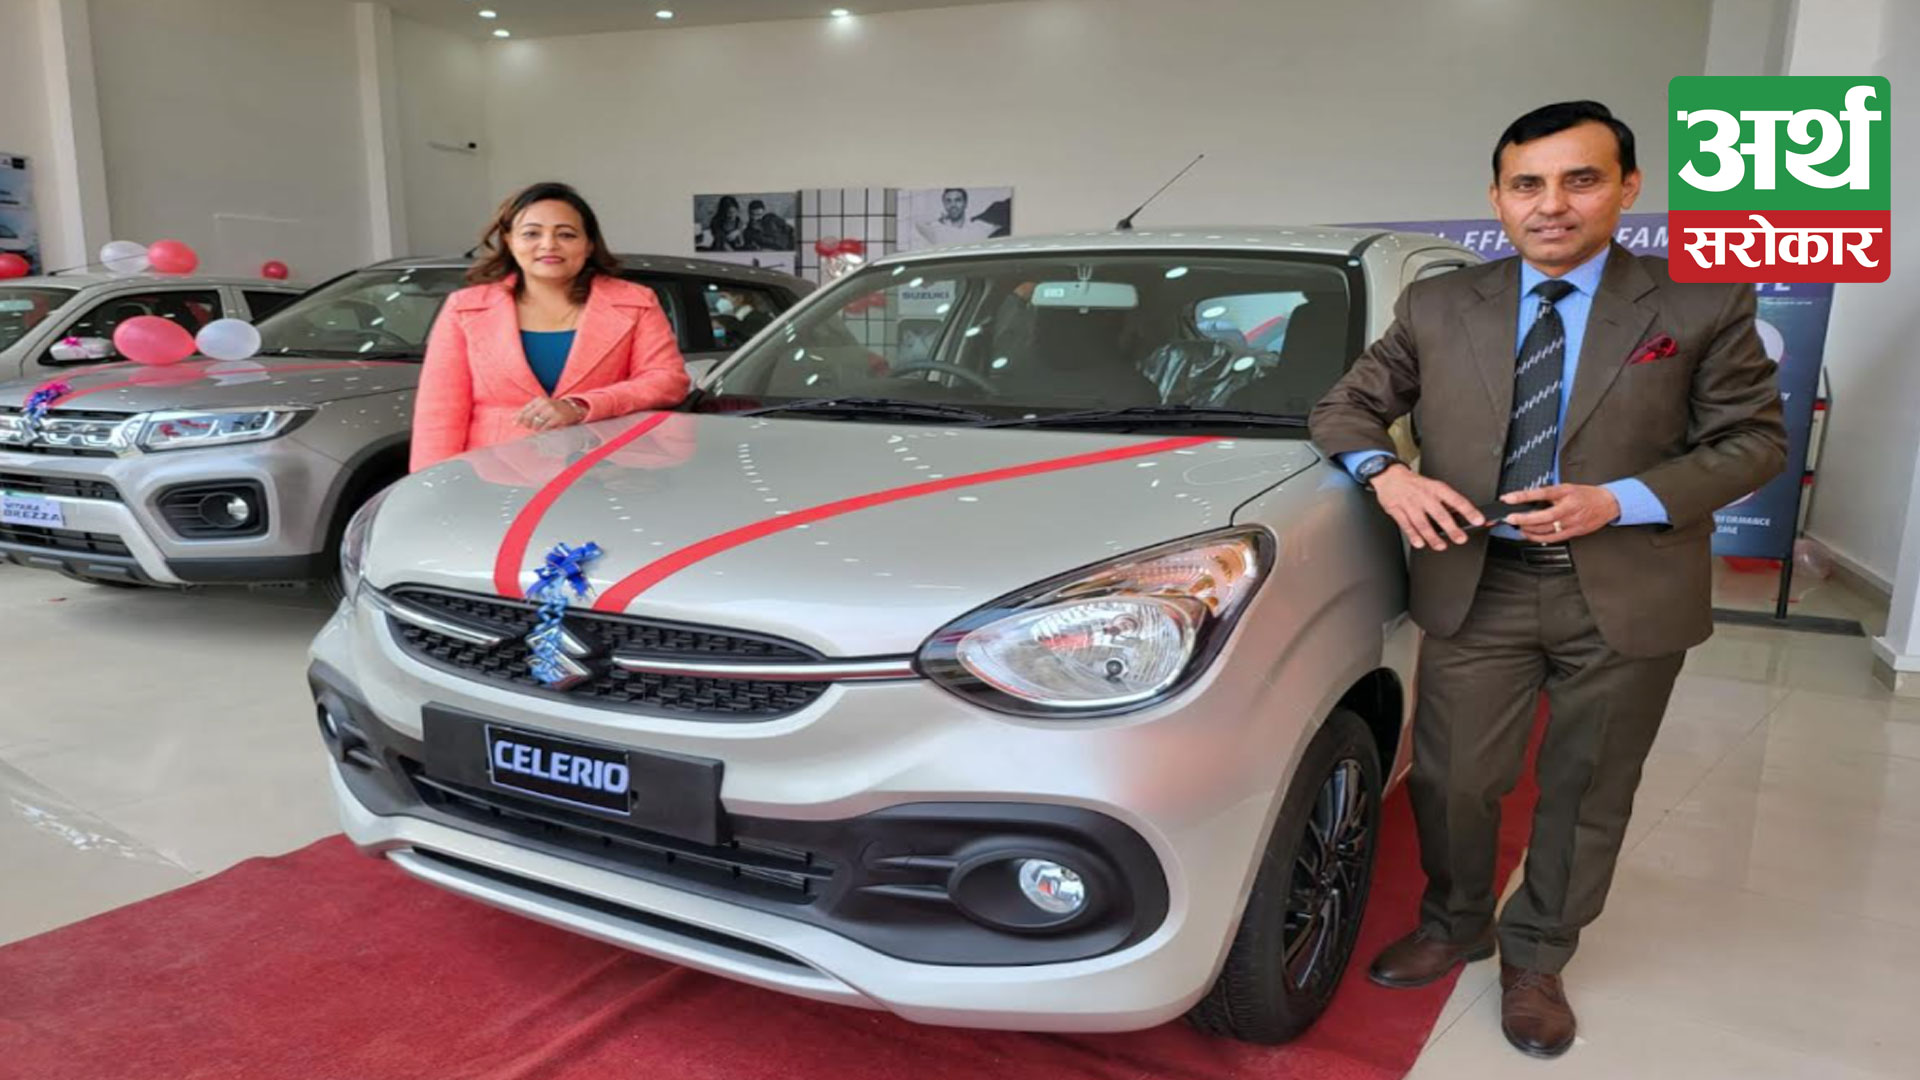 Maruti Suzuki Celerio forays into Nepalese market, new family hatchback car to be available at starting price of Rs 27.99 lakh